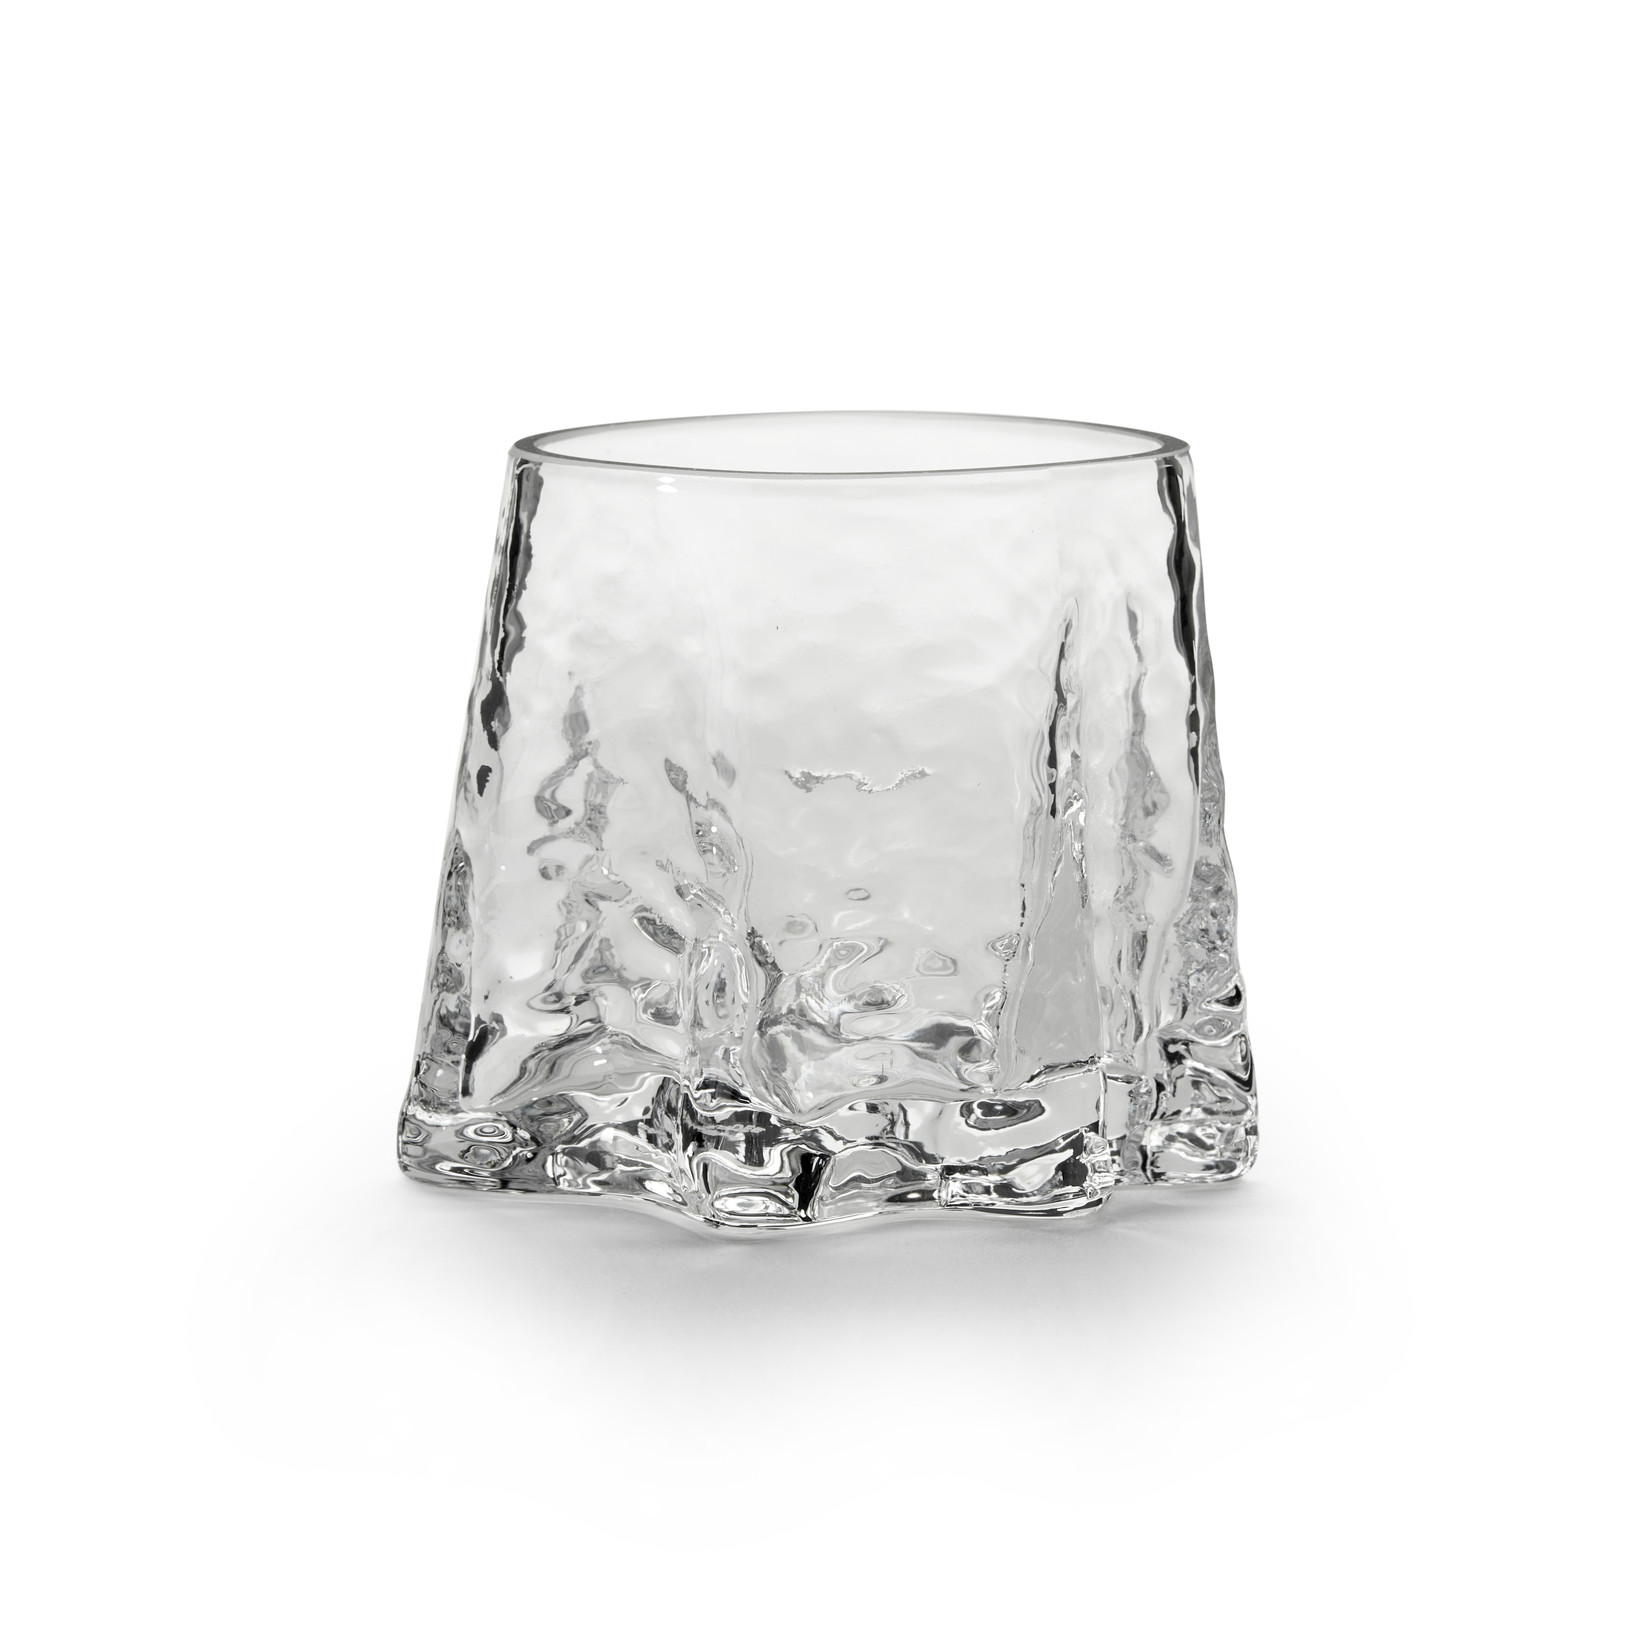 Cooee Design GRY TEALIGHT CLEAR